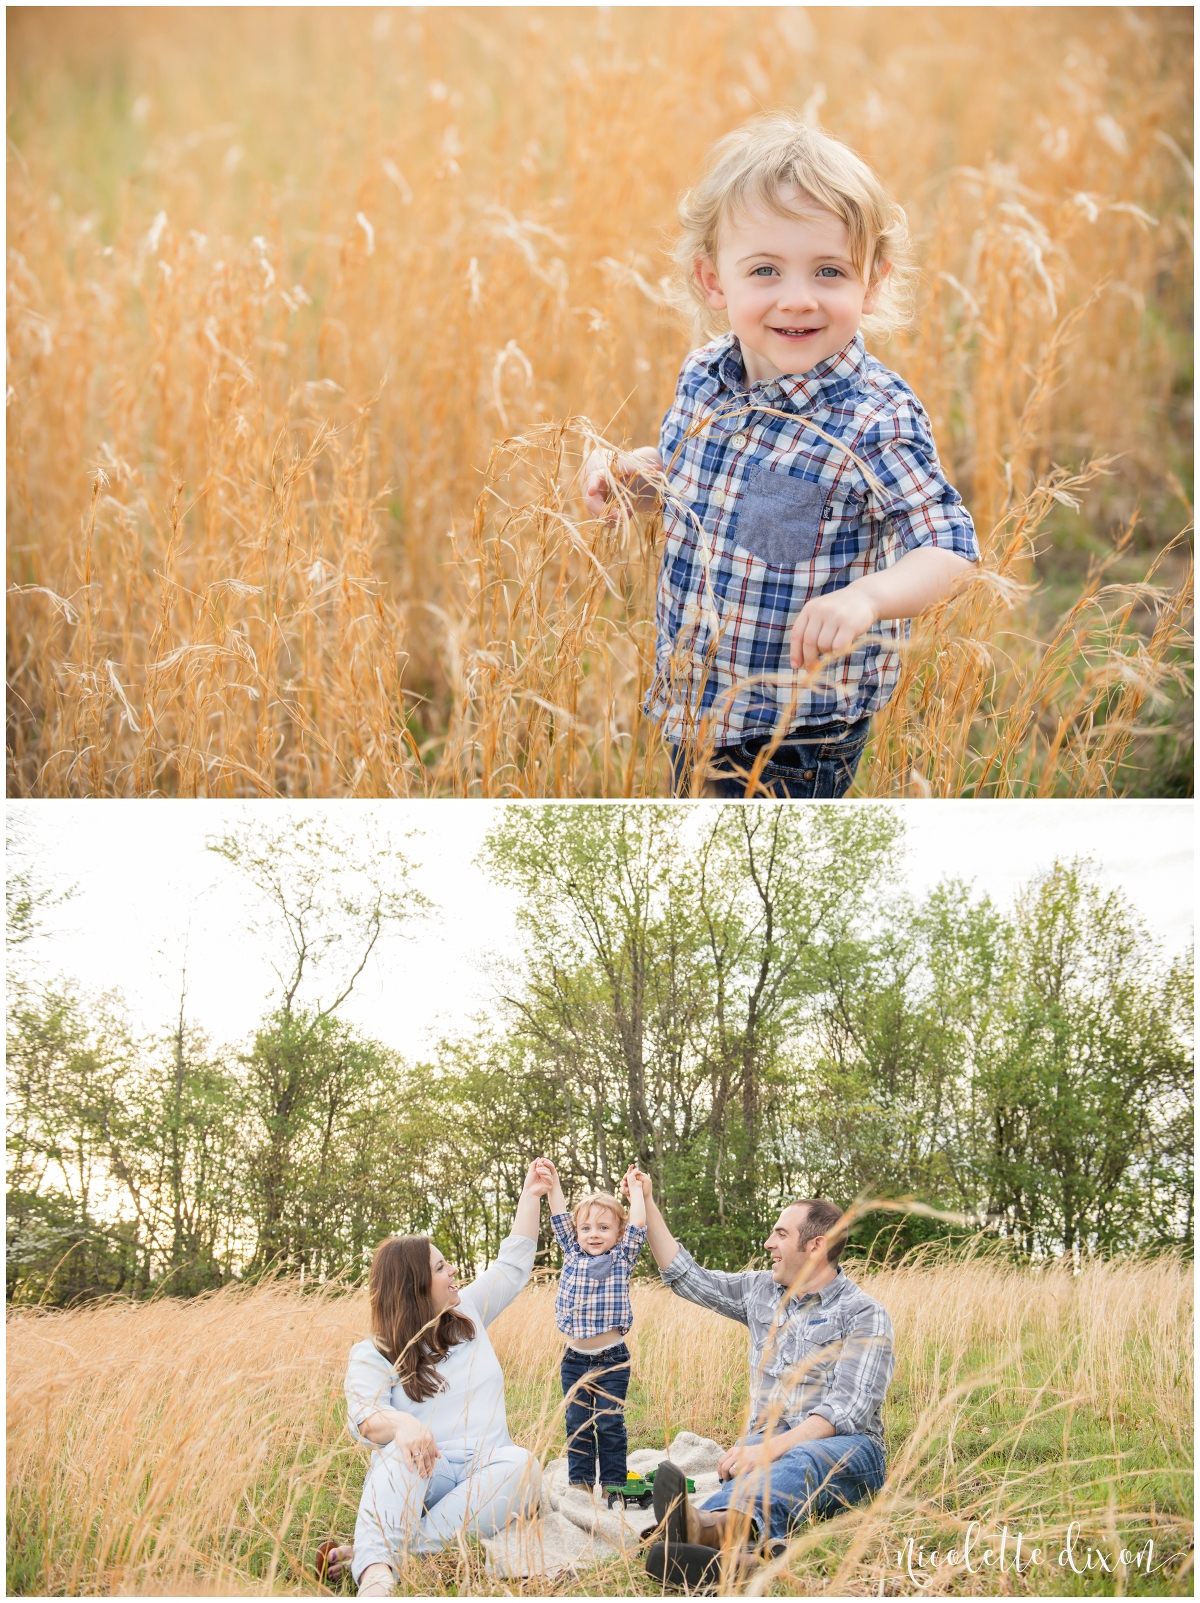 Pittsburgh Children's Photographers | Mom and dad playing with son in field